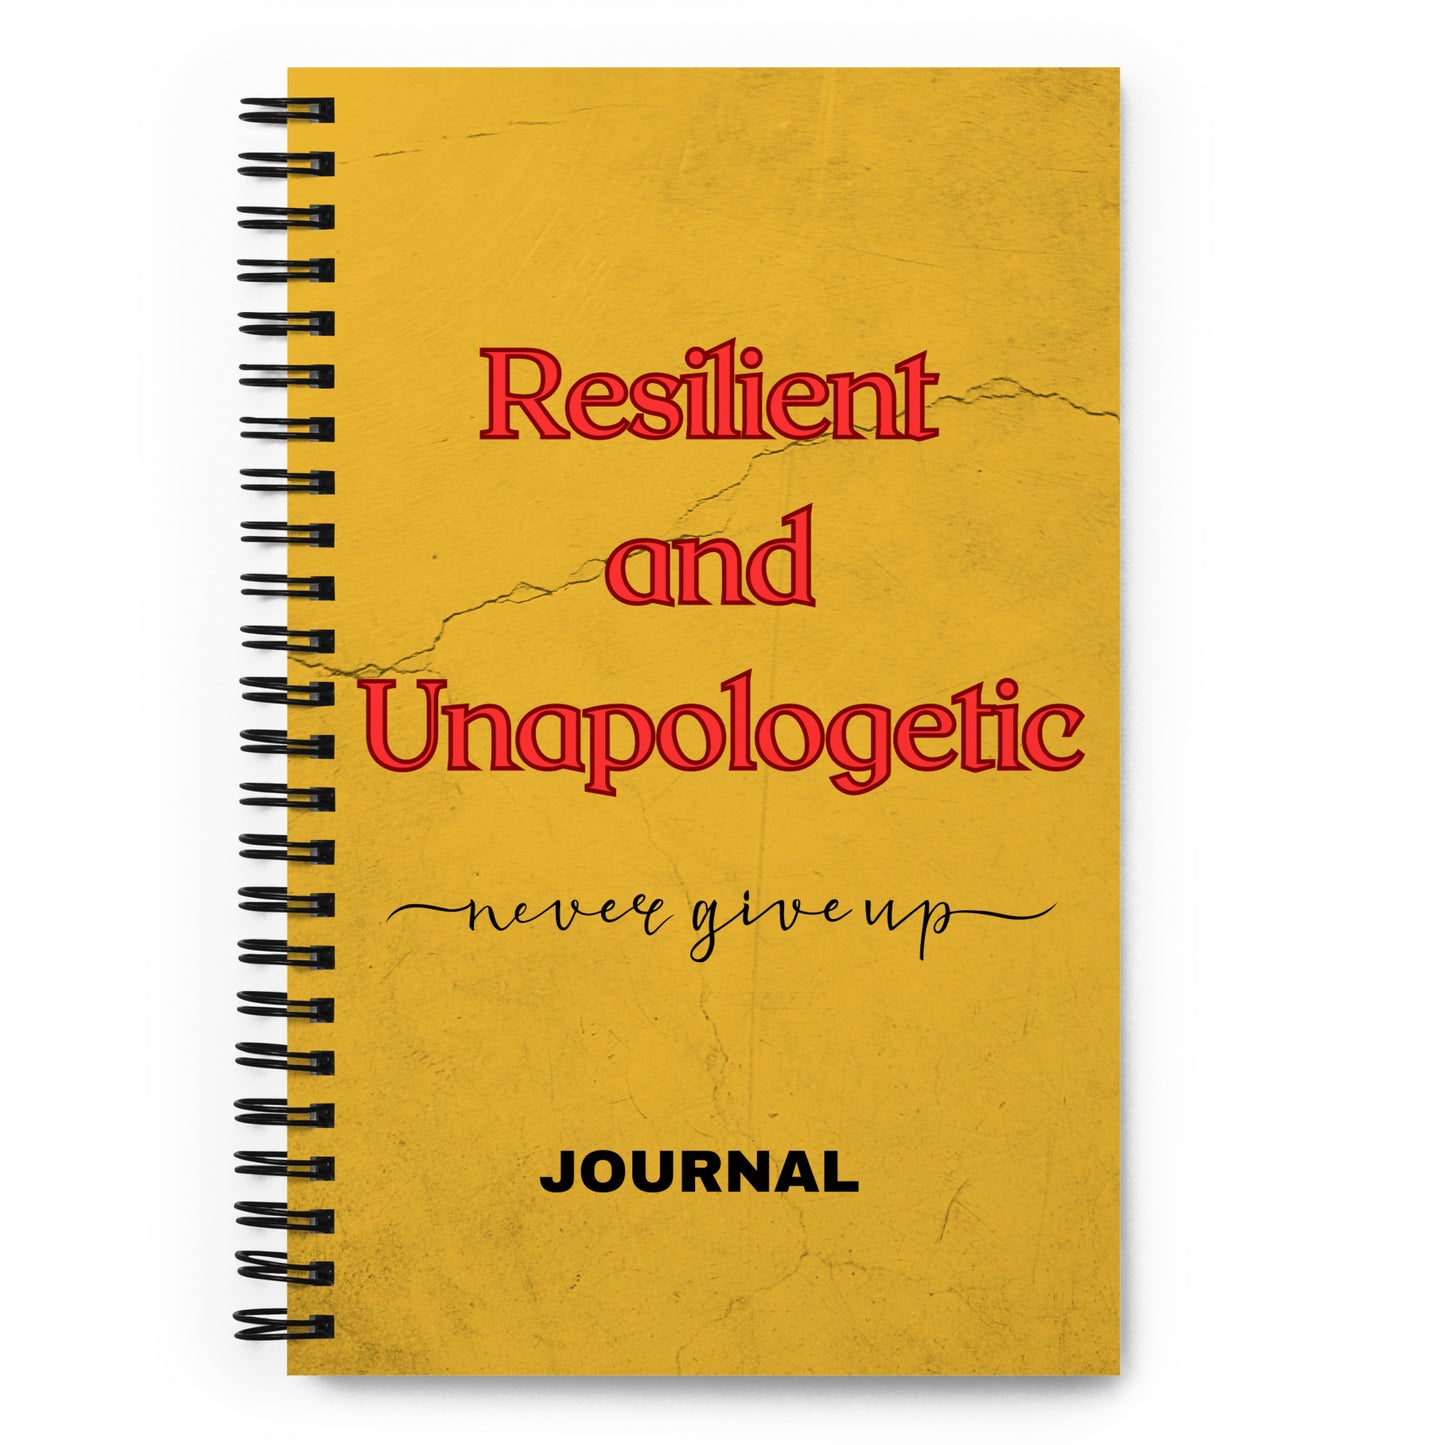 Resilient & Unapologetic Spiral notebook